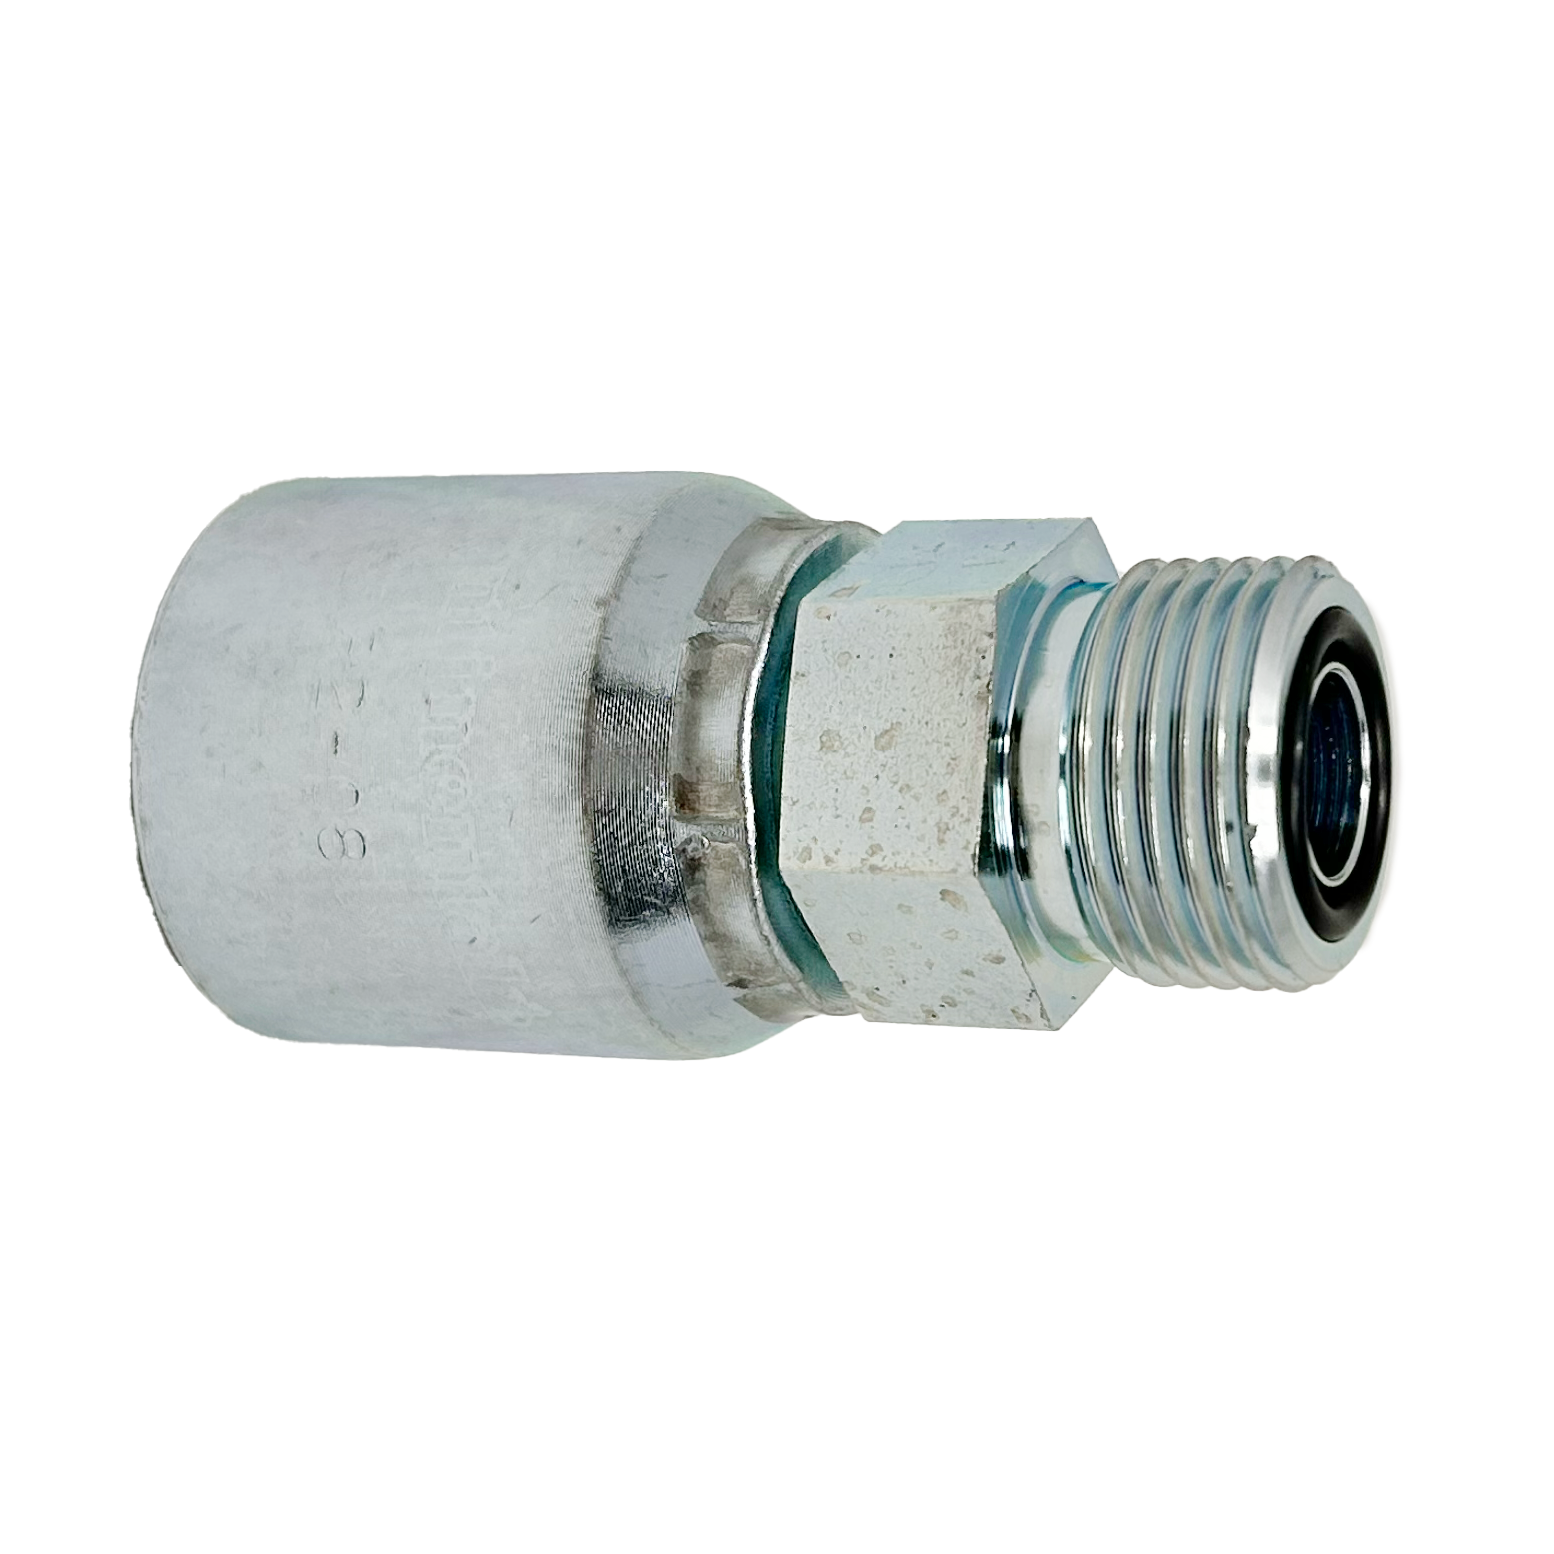 B2-OFM-0808: Continental Hose Fitting, 0.5 (1/2") Hose ID x 13/16-16 Male ORFS, Straight Rigid Connection